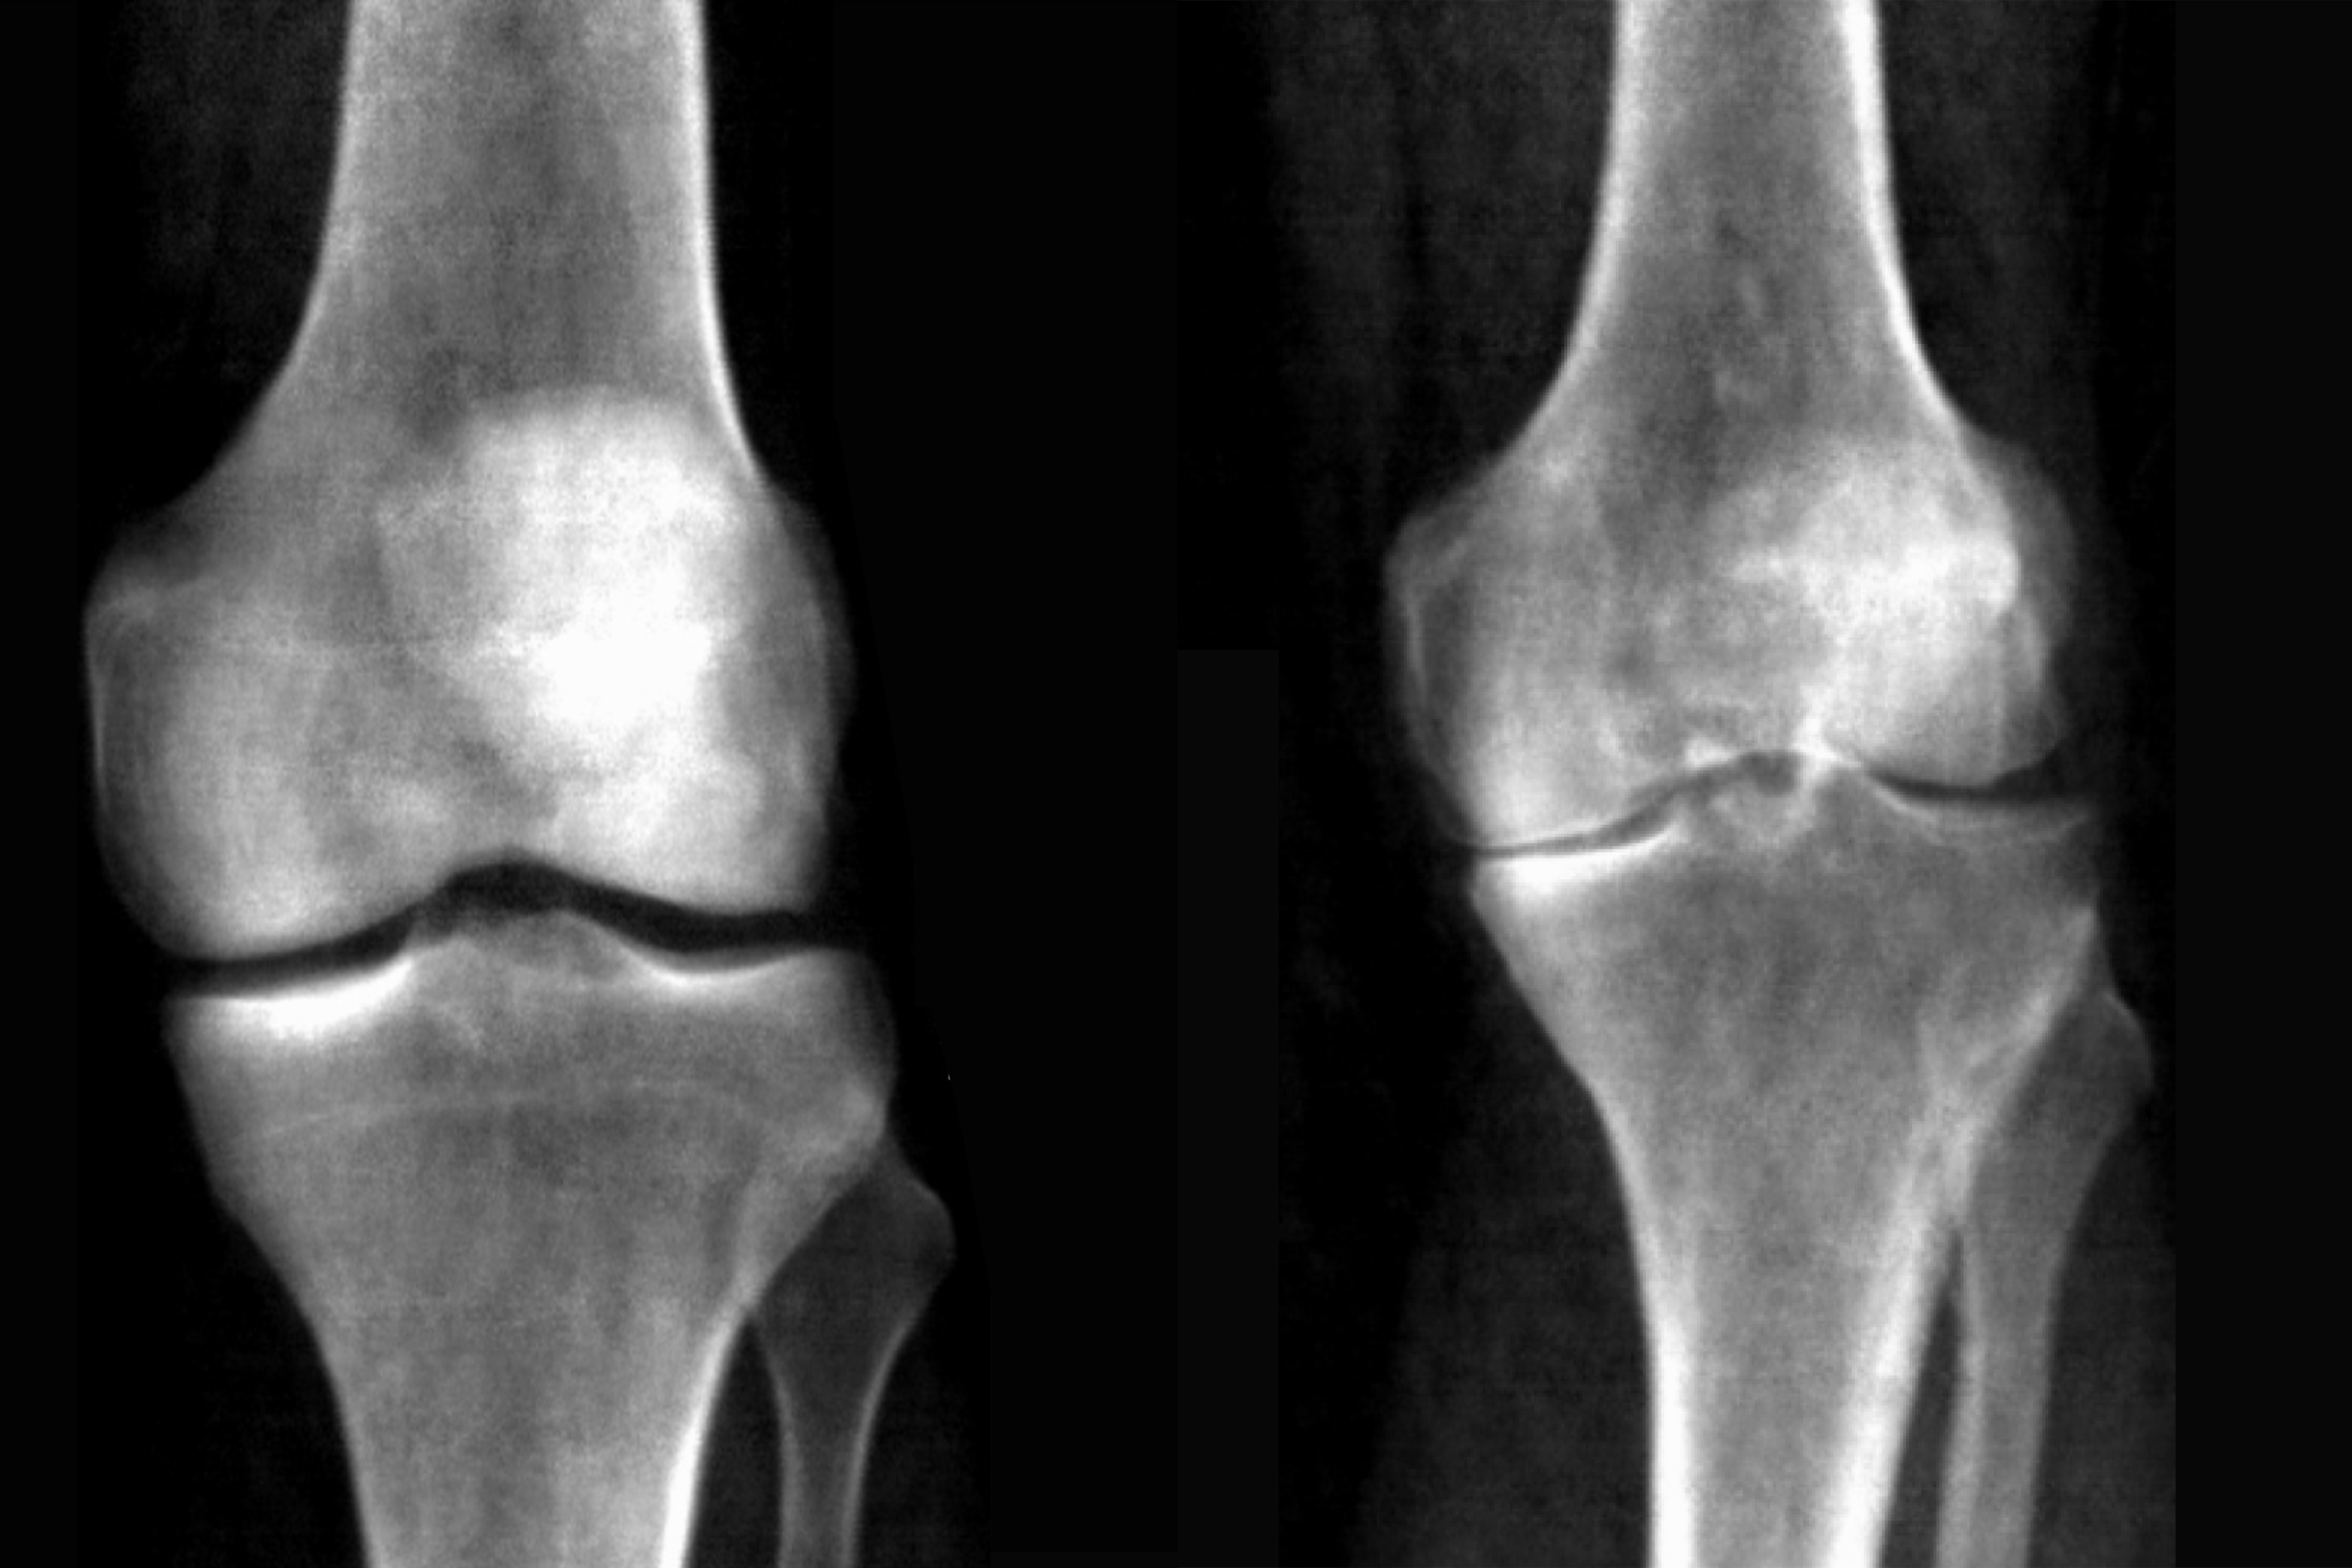 AI Tech Accurately Diagnoses Knee Arthritis from Medical Images